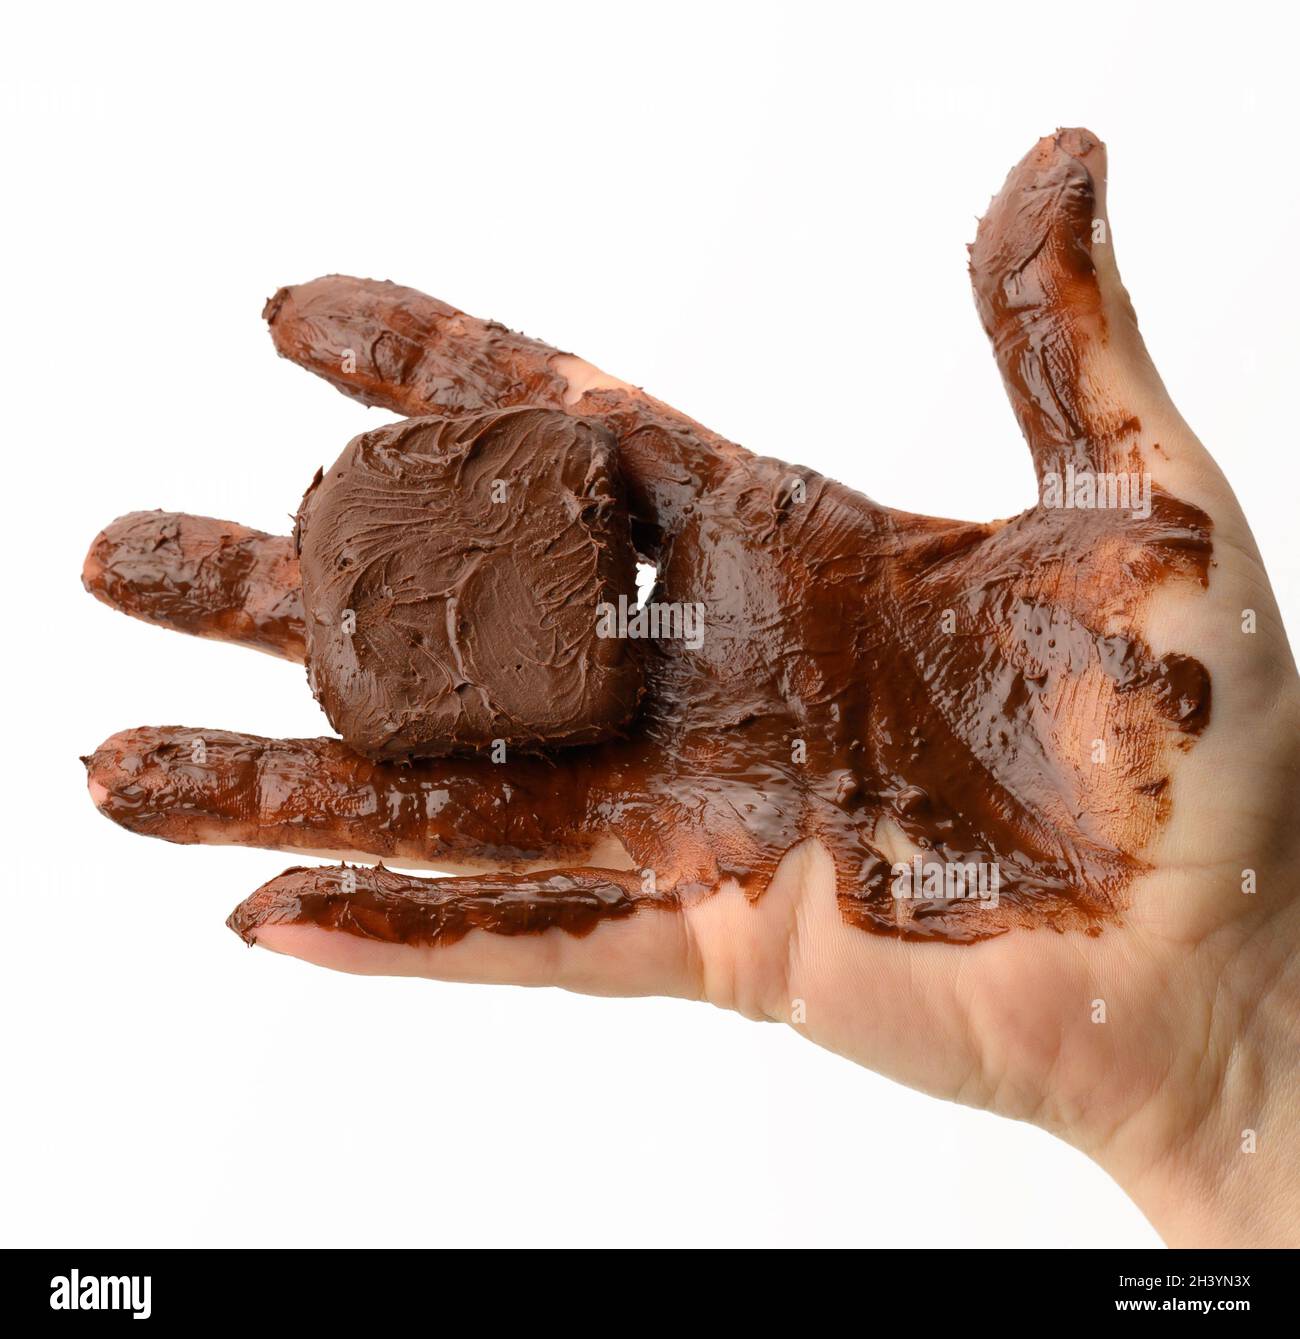 Female hand holding a melted piece of dark chocolate, hand smeared with chocolate on a white background Stock Photo